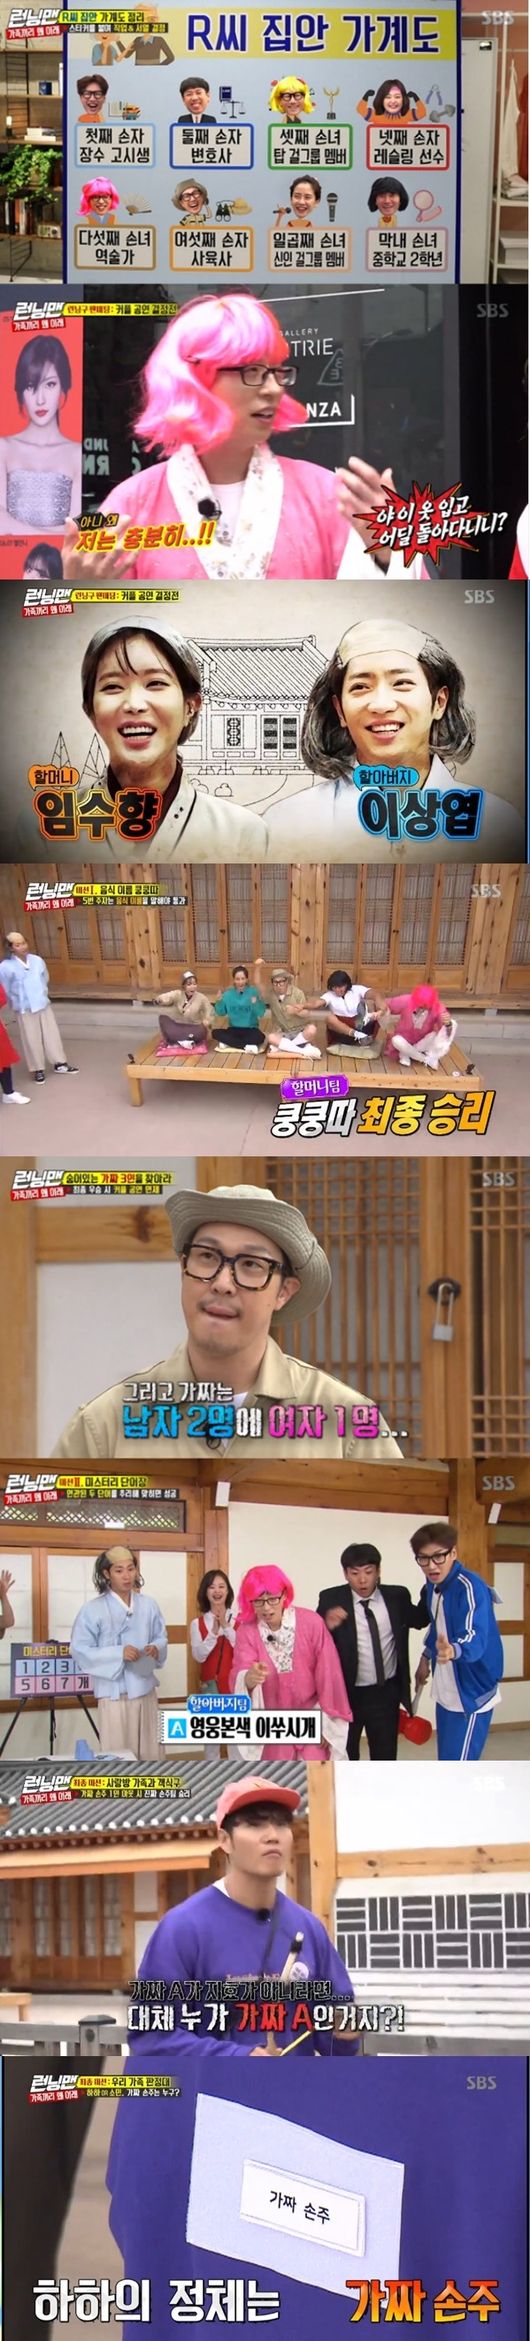 <p> ‘Running Man’Yoo Jae-Suk and HaHa is SBS ‘Running Man’of the 9th anniversary fan meeting in a couple stage a fixed middle, ‘Running Man’is invariably ‘2049 target audience viewership’ the same time the # 1 spot.</p><p>Viewership survey Agency Nielsen Korea, according to the last 26 broadcast of ‘Running Man’per minute, with a maximum application rate of 7. 9%soared, and the main advertising officials of the important indicators of ‘2049 target audience’3. 1%(NCR furniture viewership Part 2 standard)record for the same time period, 1 ranked. Average viewership is part 1 of 4. 9%, Part 2 6. 6%(NCR furniture viewership standards)was.</p><p>This day in the broadcast ahead of ‘Running Man’ 9th anniversary special project ‘Running Man Love Without Love (Live at Summer Vacation/08 - running research project’ the second story decorated. Last week the broadcasting project in the first public and ‘group dance’and had members this time ‘a couple gigs’two fake hands Find went.</p><p>8 of the members are cousins with laughter inside looks like, and learn any number of effects and more of the Maple family of grandma, grandpa appeared to “our grandchildren are five, why not eight?”said the authentic start of the race. This time race in the real hand and the final hand that fake 3 to figure out to win the race, FAKE 3s grandchildren only out to win was done in a way.</p><p>Grandpa Tim and grandma as a team handing The Mission this was done, and 1 car The Mission ‘food names, stomp offto Grandmas team a fake Man 2 Woman 1the hint was obtained. Since The Mission through the options for this cute and special effect fake noticed, the fake grandchild to go to. This scene is per minute, with a maximum application rate of 7. 9%and the ‘best 1 minute’.</p><p>Eventually couple to couple gig 1 is determined as the Middle, add 1 is the filmmaker decided to have Yoo Jae-Suk ha as a partner of Love Without Love (Live at Summer Vacation/08 performances in. [Photo] SBS ‘Running Man’ Broadcast Capture</p><p> SBS ‘Running Man’ Broadcast Capture</p>